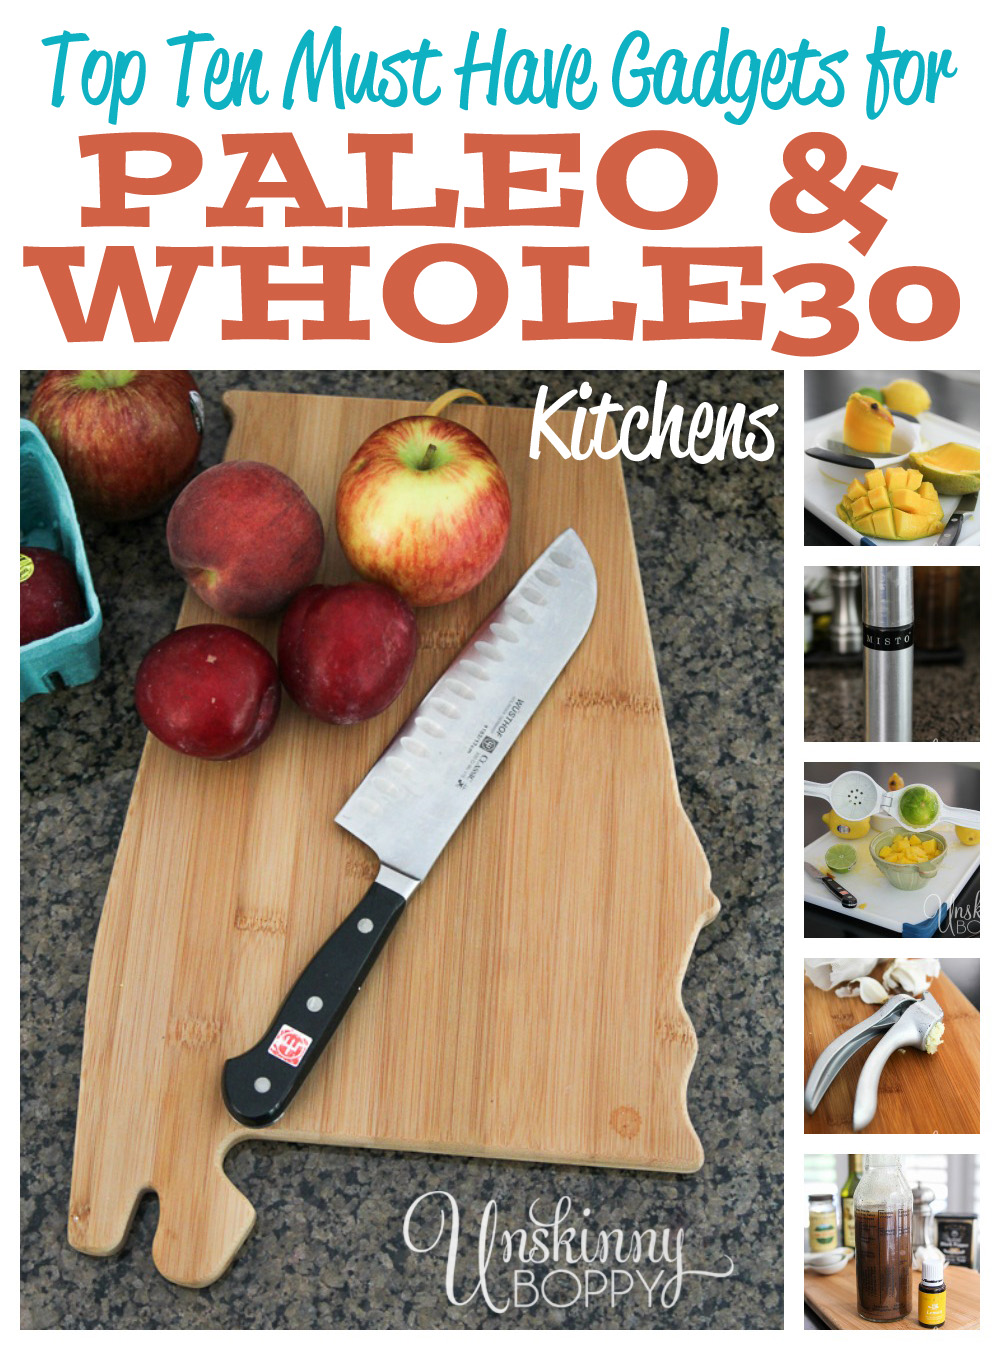 https://bethbryan.com/wp-content/uploads/2014/07/Must-Have-Kitchen-gadgets-for-Whole30.jpg